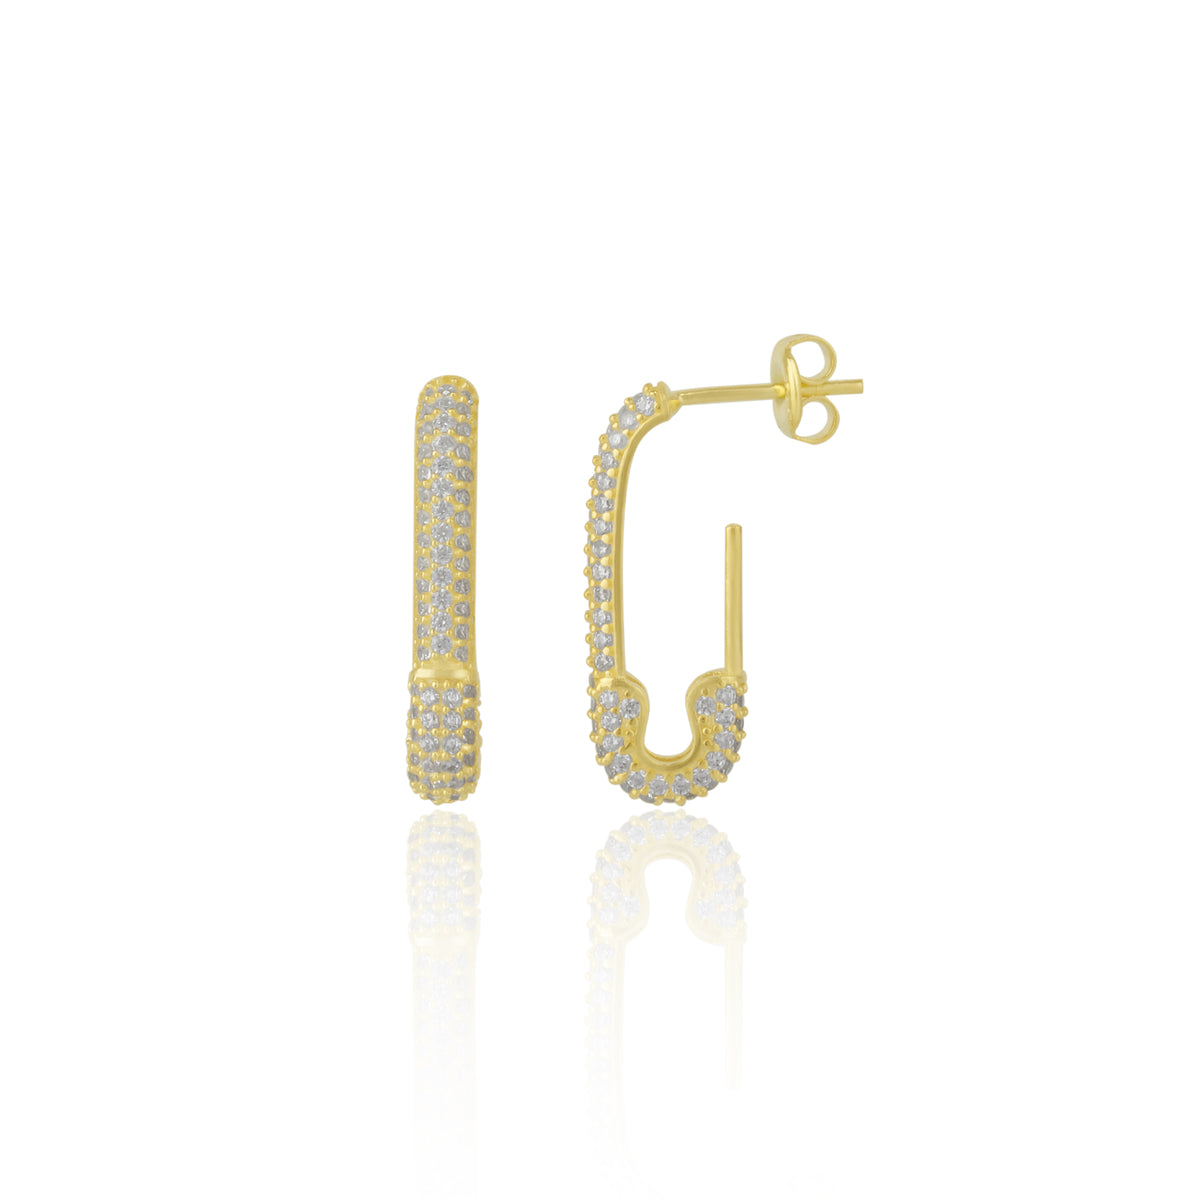 Pave Stud Safety Pin Earring Jewelled Sterling Silver